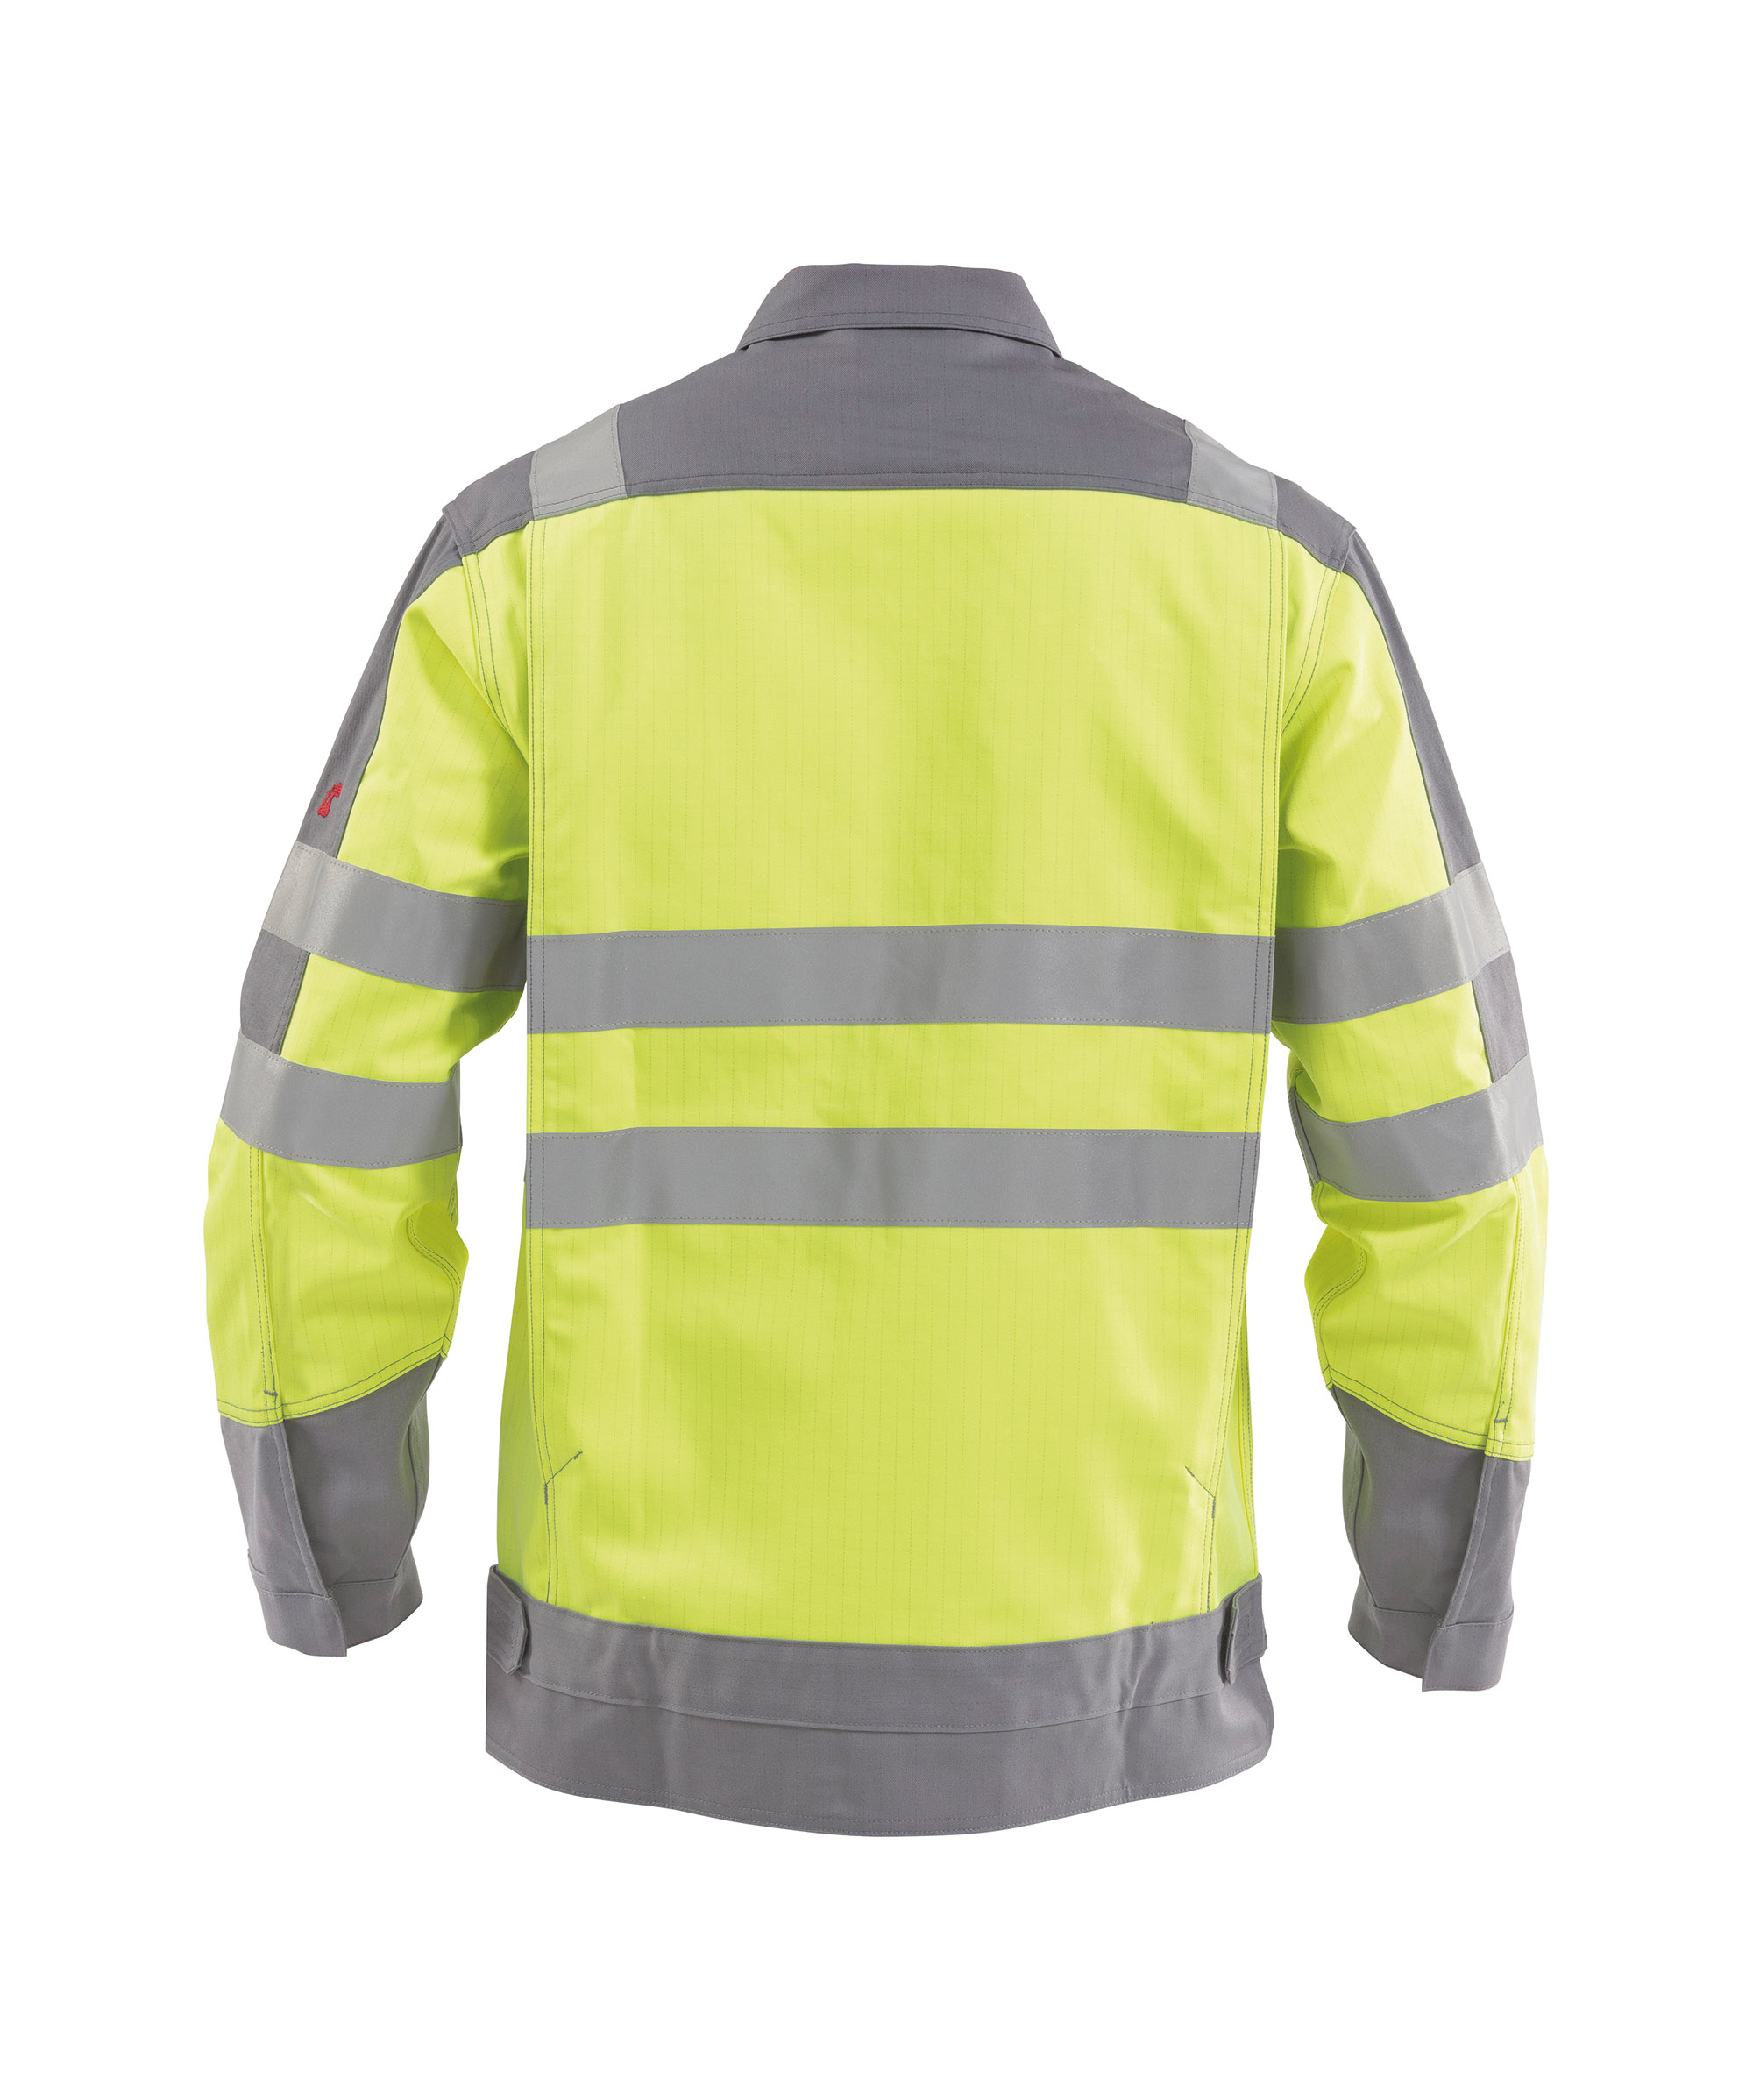 franklin_two-tone-multinorm-high-visibility-work-jacket_fluo-yellow-graphite-grey_back.jpg